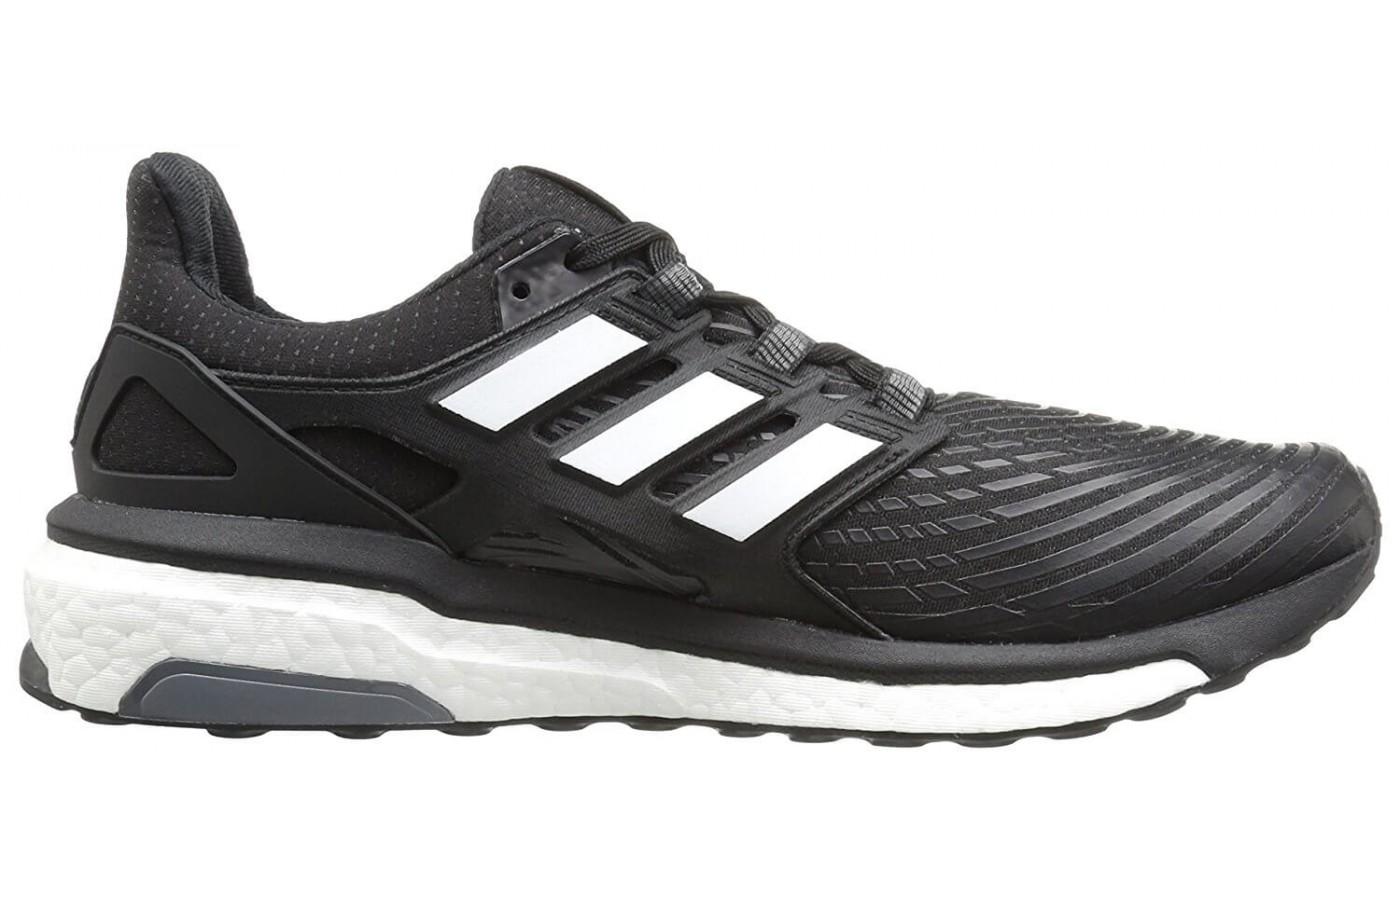 the Adidas Energy Boost has soft cushioning in the heel